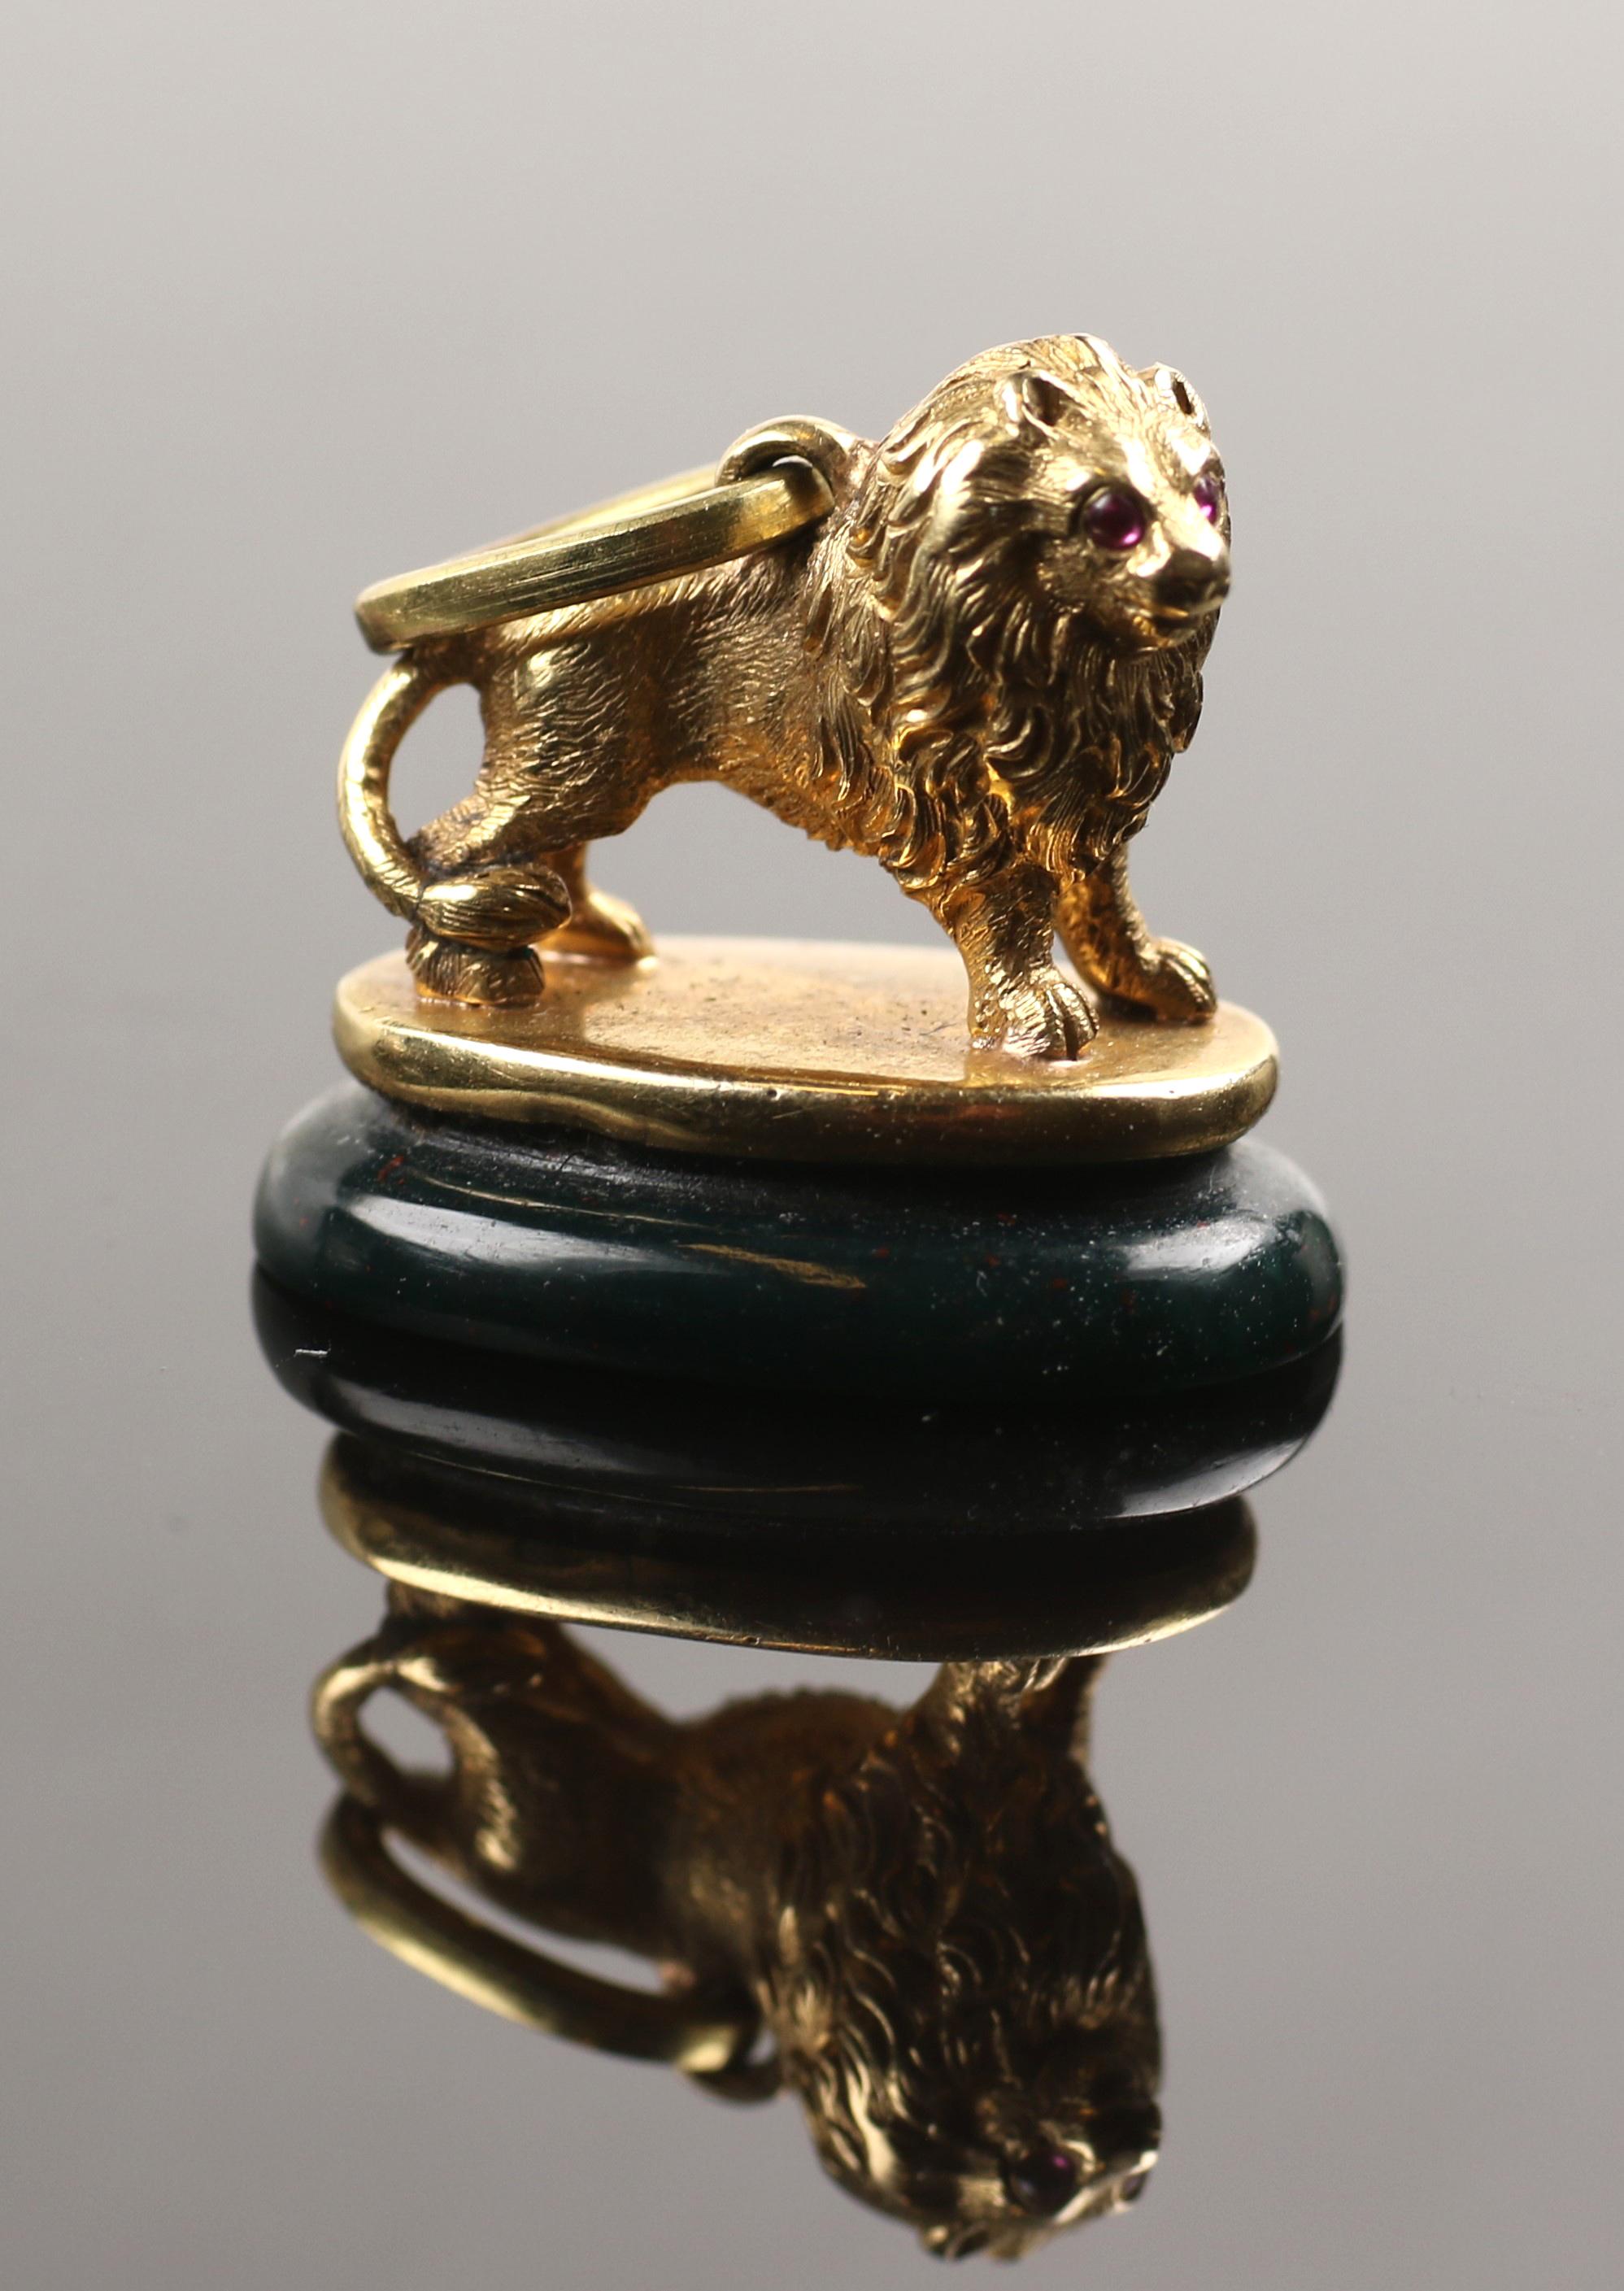 This antique heliotrope seal fob pendant is absolutely exquisite. An intricately crafted piece, originating from the Victorian era, showcasing the timeless elegance of that period.

One striking feature of this fob is the heliotrope seal - also